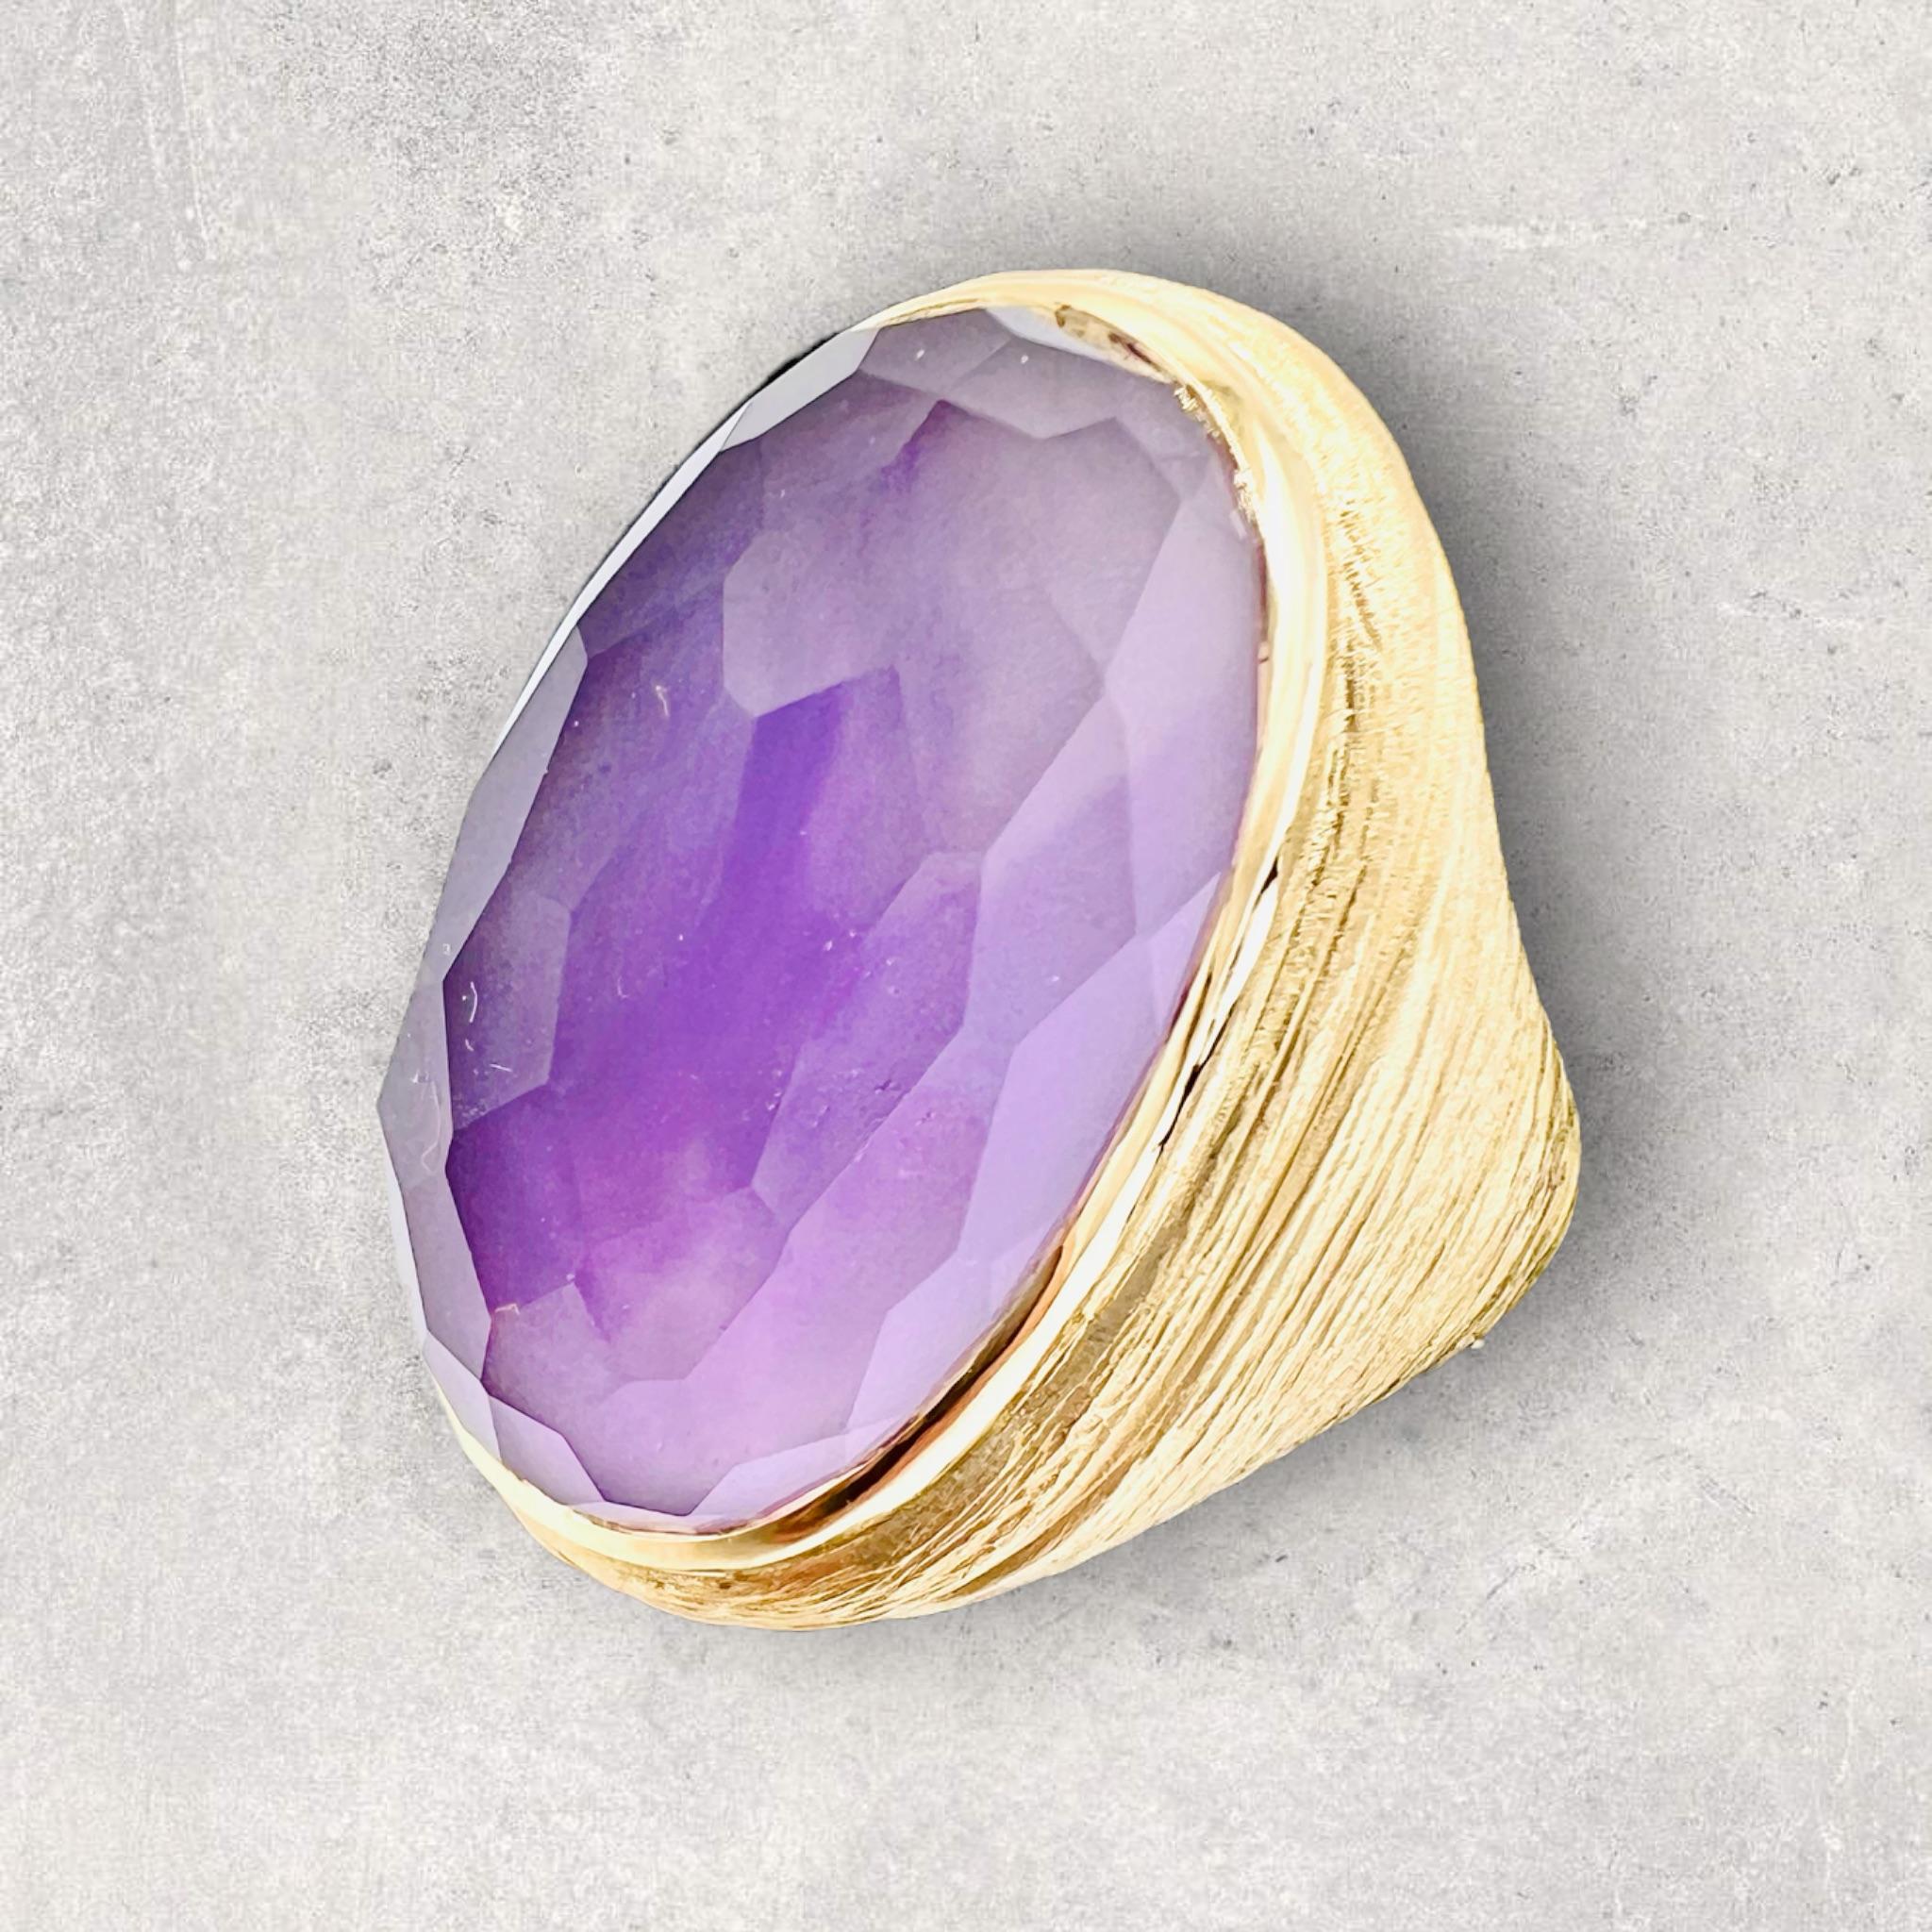 Important 18 Carat Gold Ring Set with a Faceted Amethyst 6